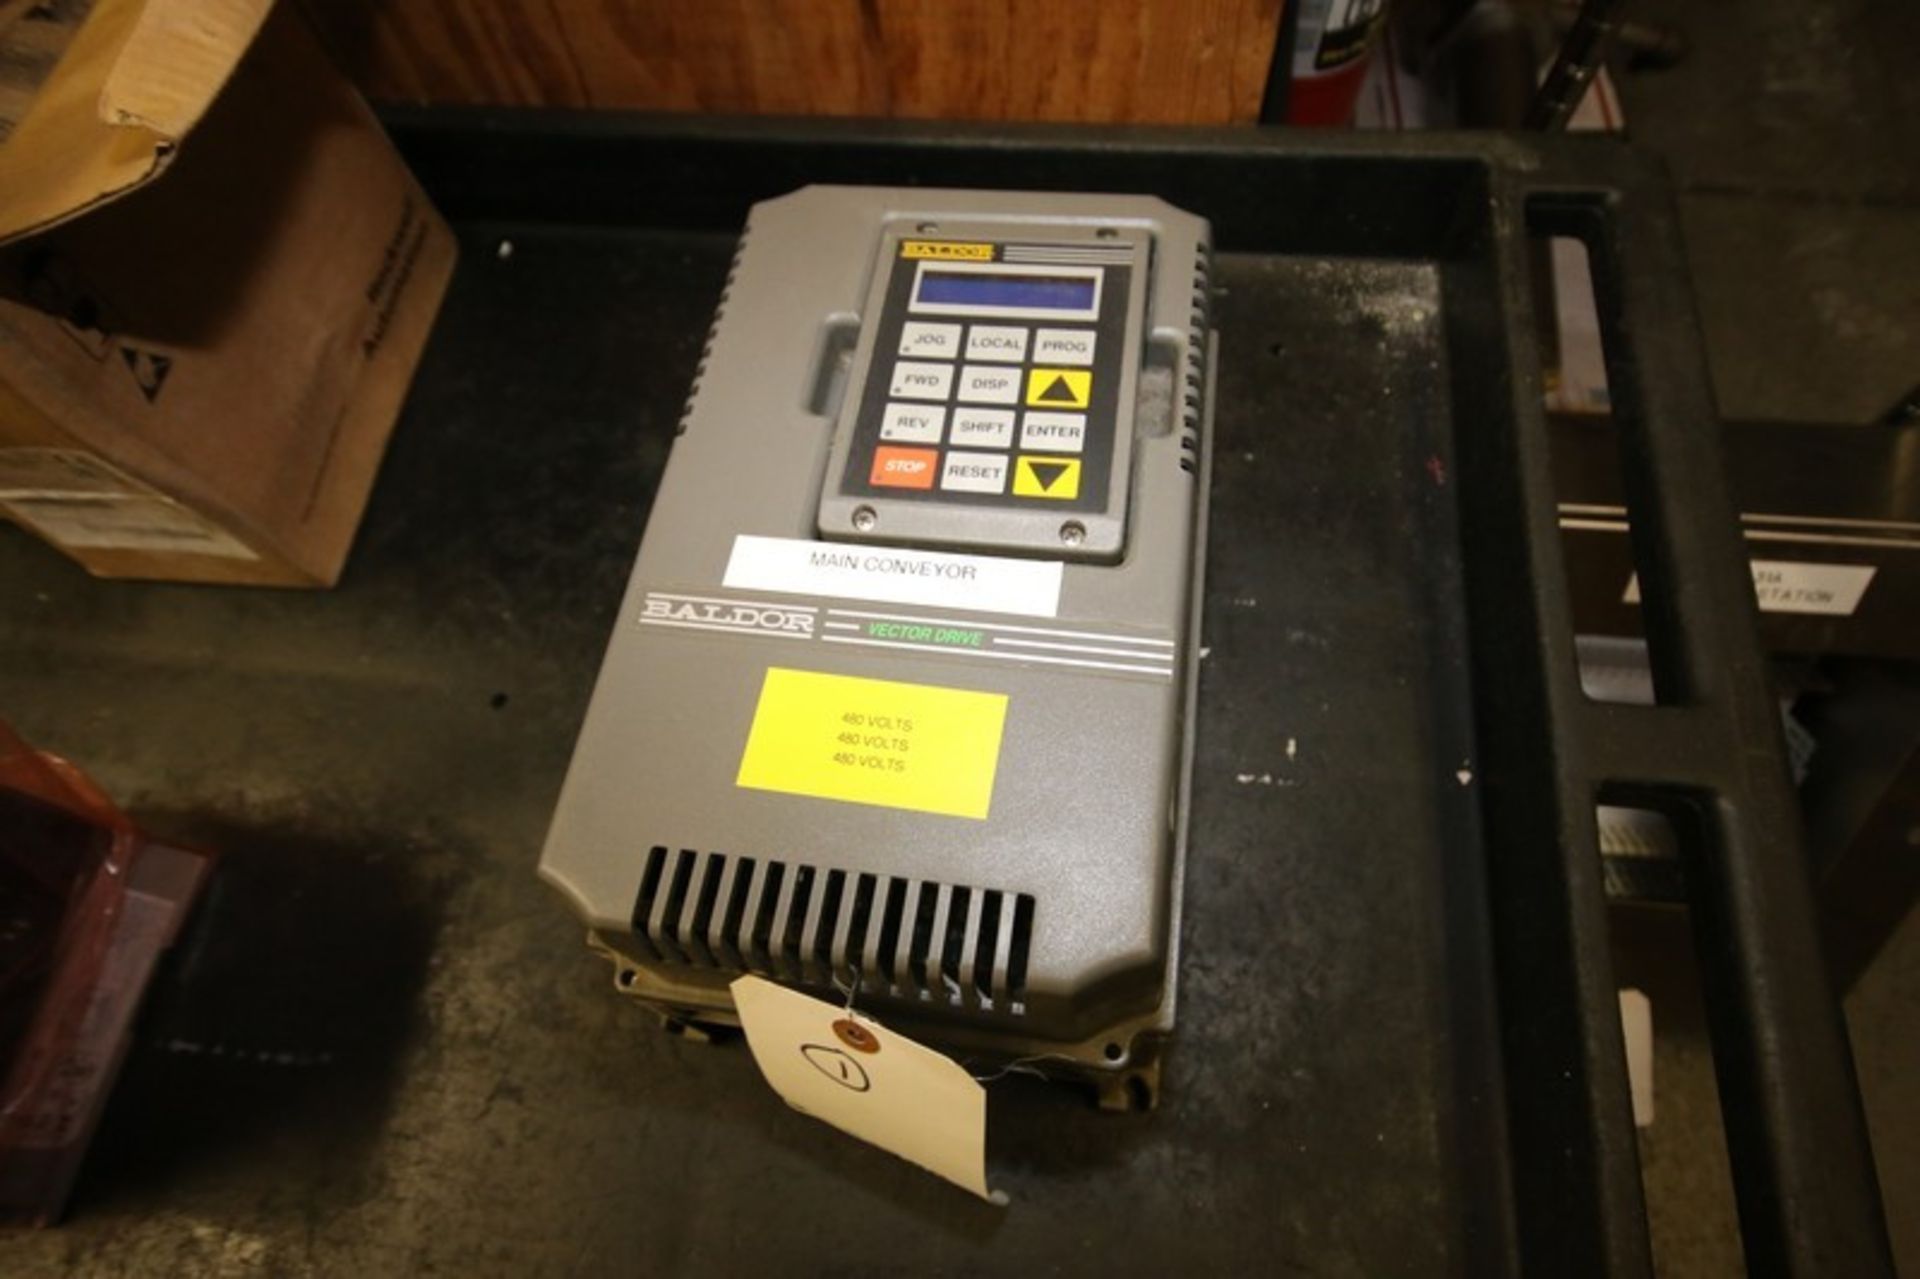 Baldor VFD, Cat. No. ZD15H402-E, SN0899PX227, 460V 3 Phase (INV#81488)(Located @ the MDG Auction